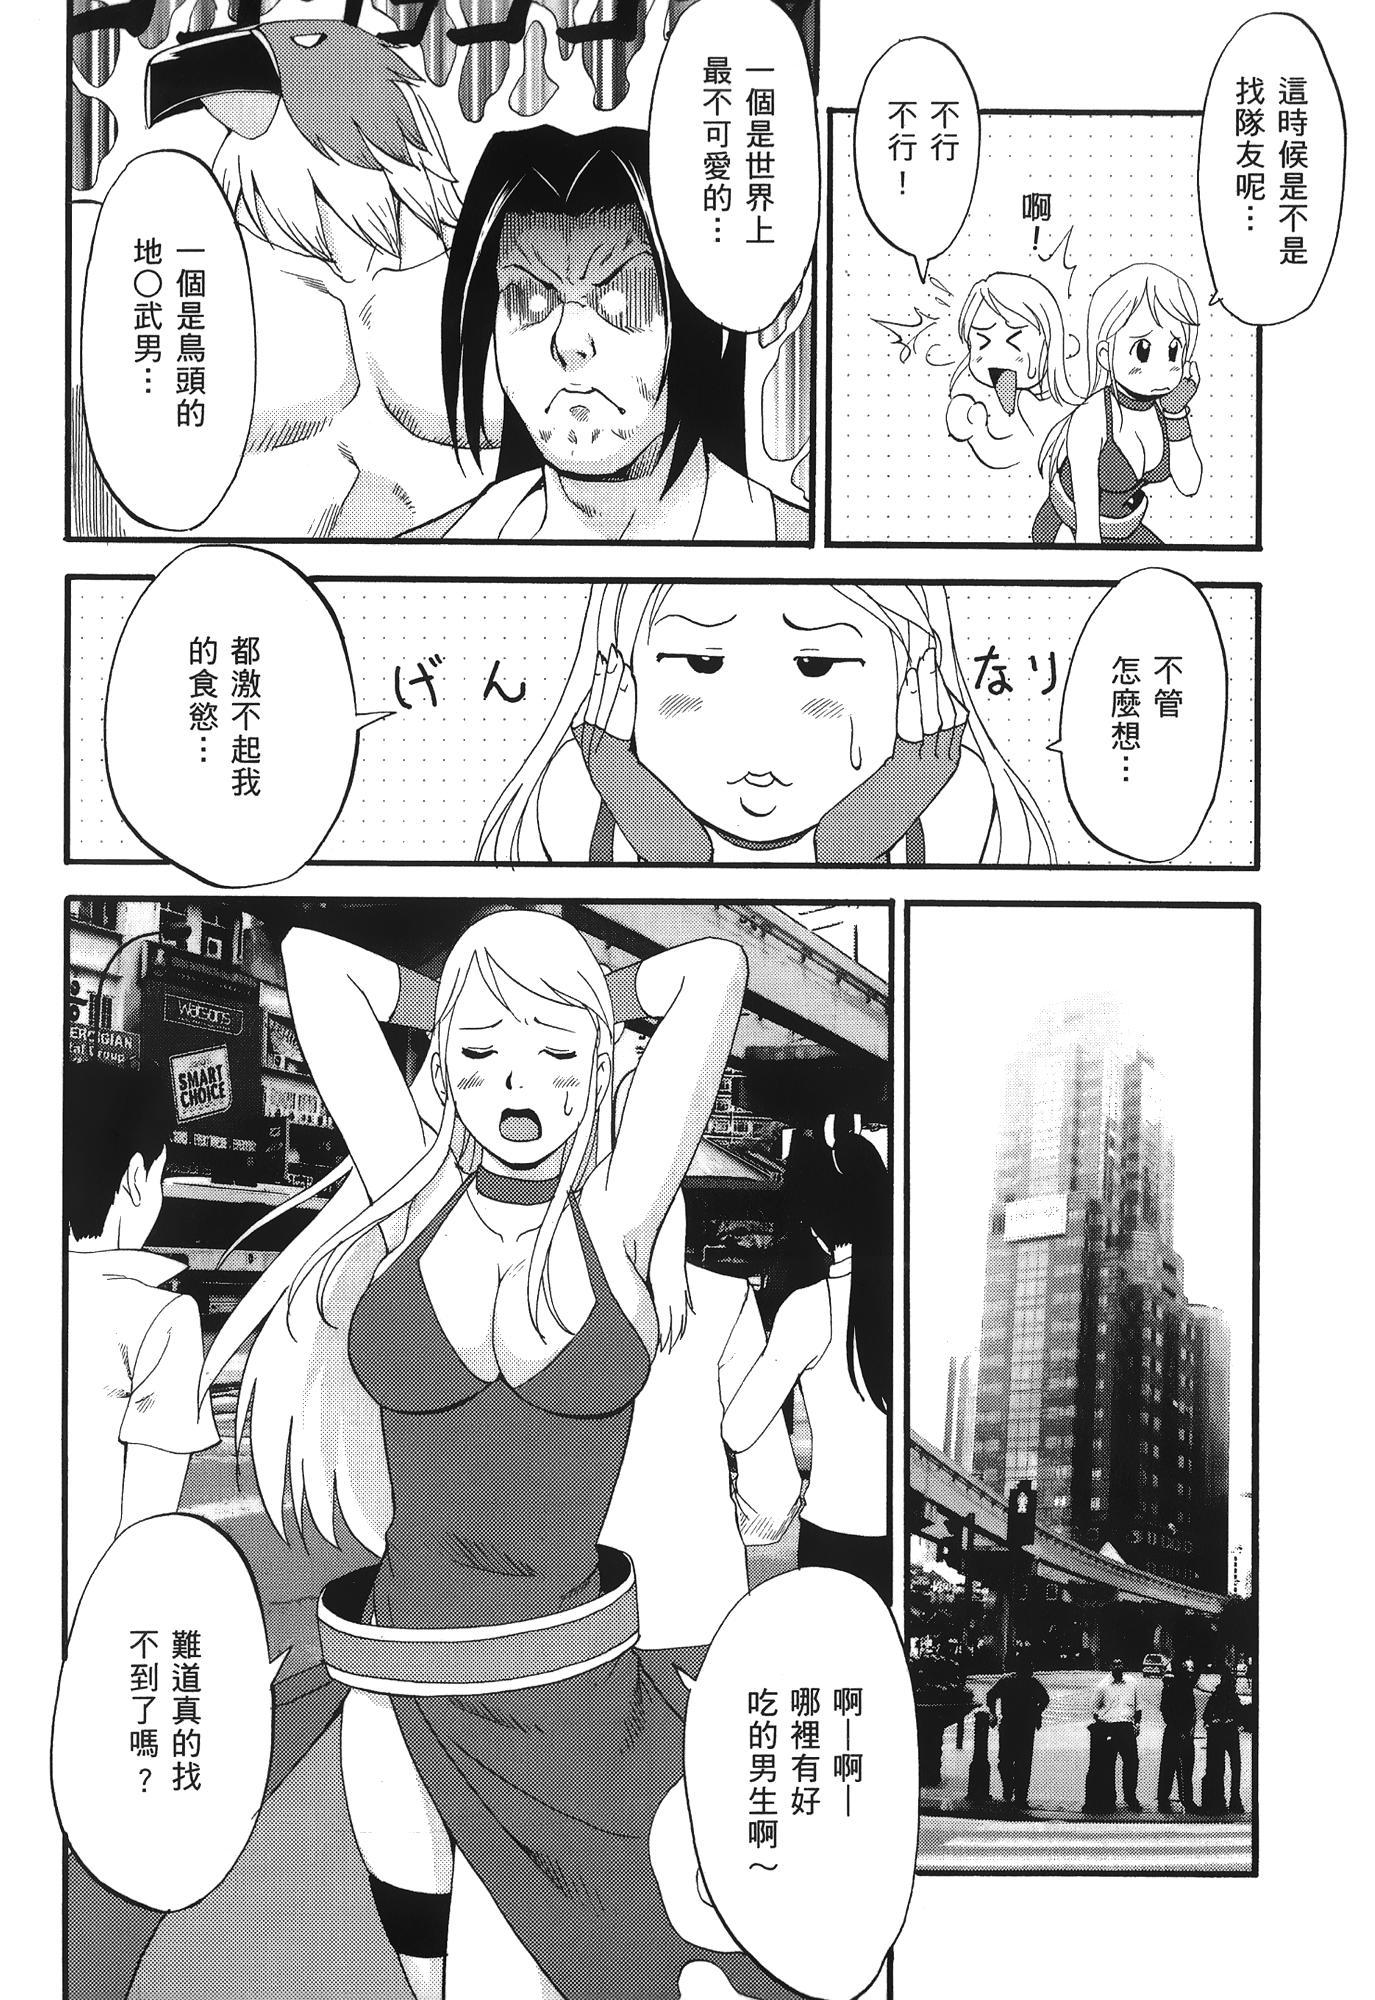 Orgame [Saigado] THE YURI & FRIENDS 6 (King of Fighters) | 武鬥美少女 [Chinese] - King of fighters Punheta - Page 3